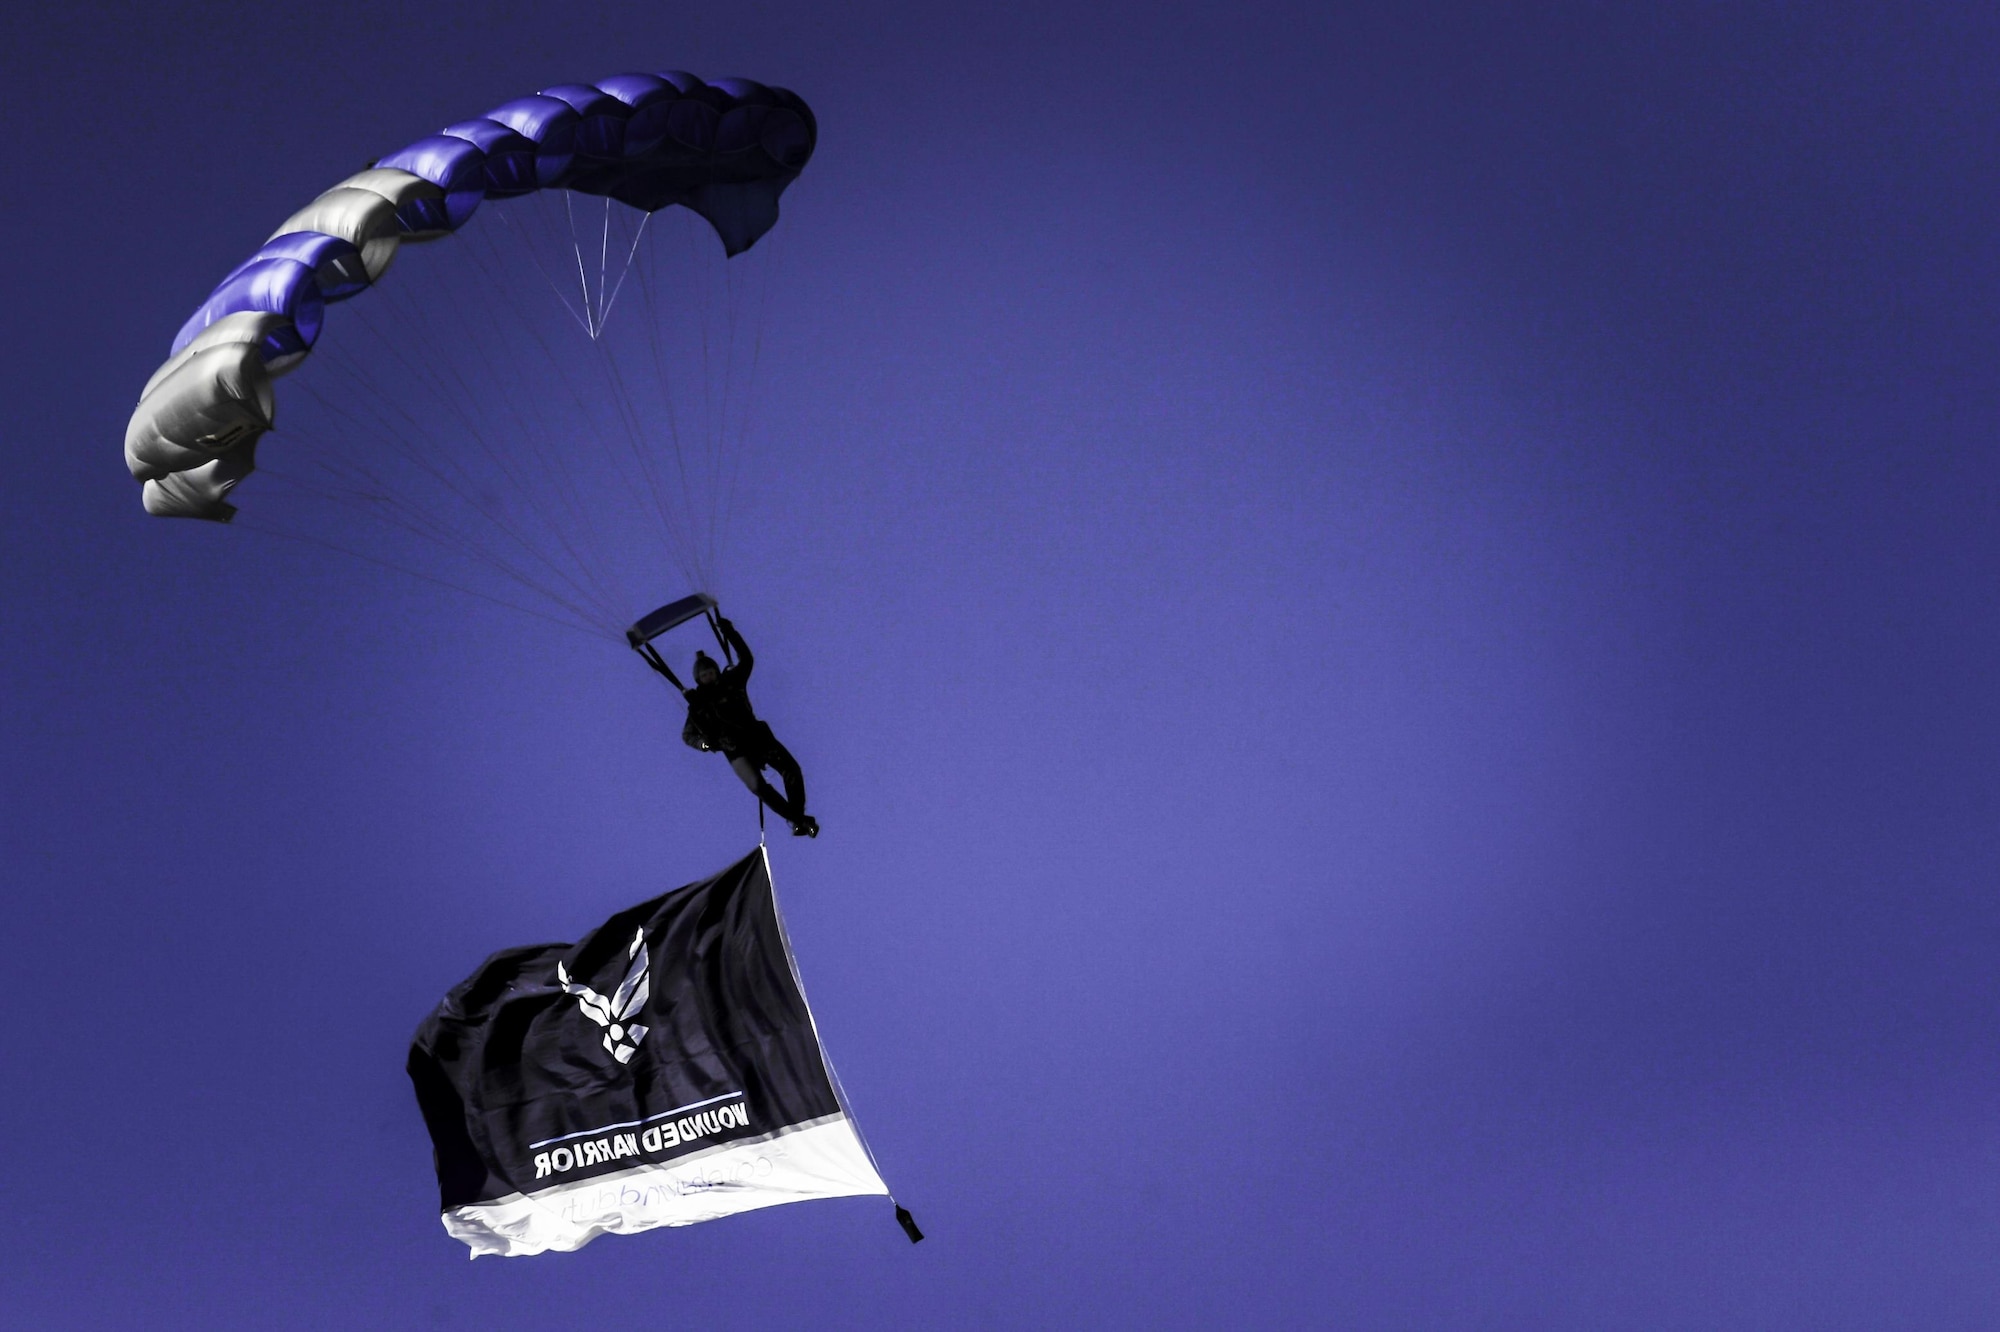 An Air Force Wings of Blue member descends to the ground with the wounded warrior flag during the 2017 Air Force Wounded Warrior Trials opening ceremony on Nellis Air Force Base, Nev., Feb. 24, 2017. The Trials are an adaptive sports event designed to promote the mental and physical well-being of seriously ill and injured military members and veterans. (U.S. Air Force photo by Airman 1st Class Kevin Tanenbaum/Released)